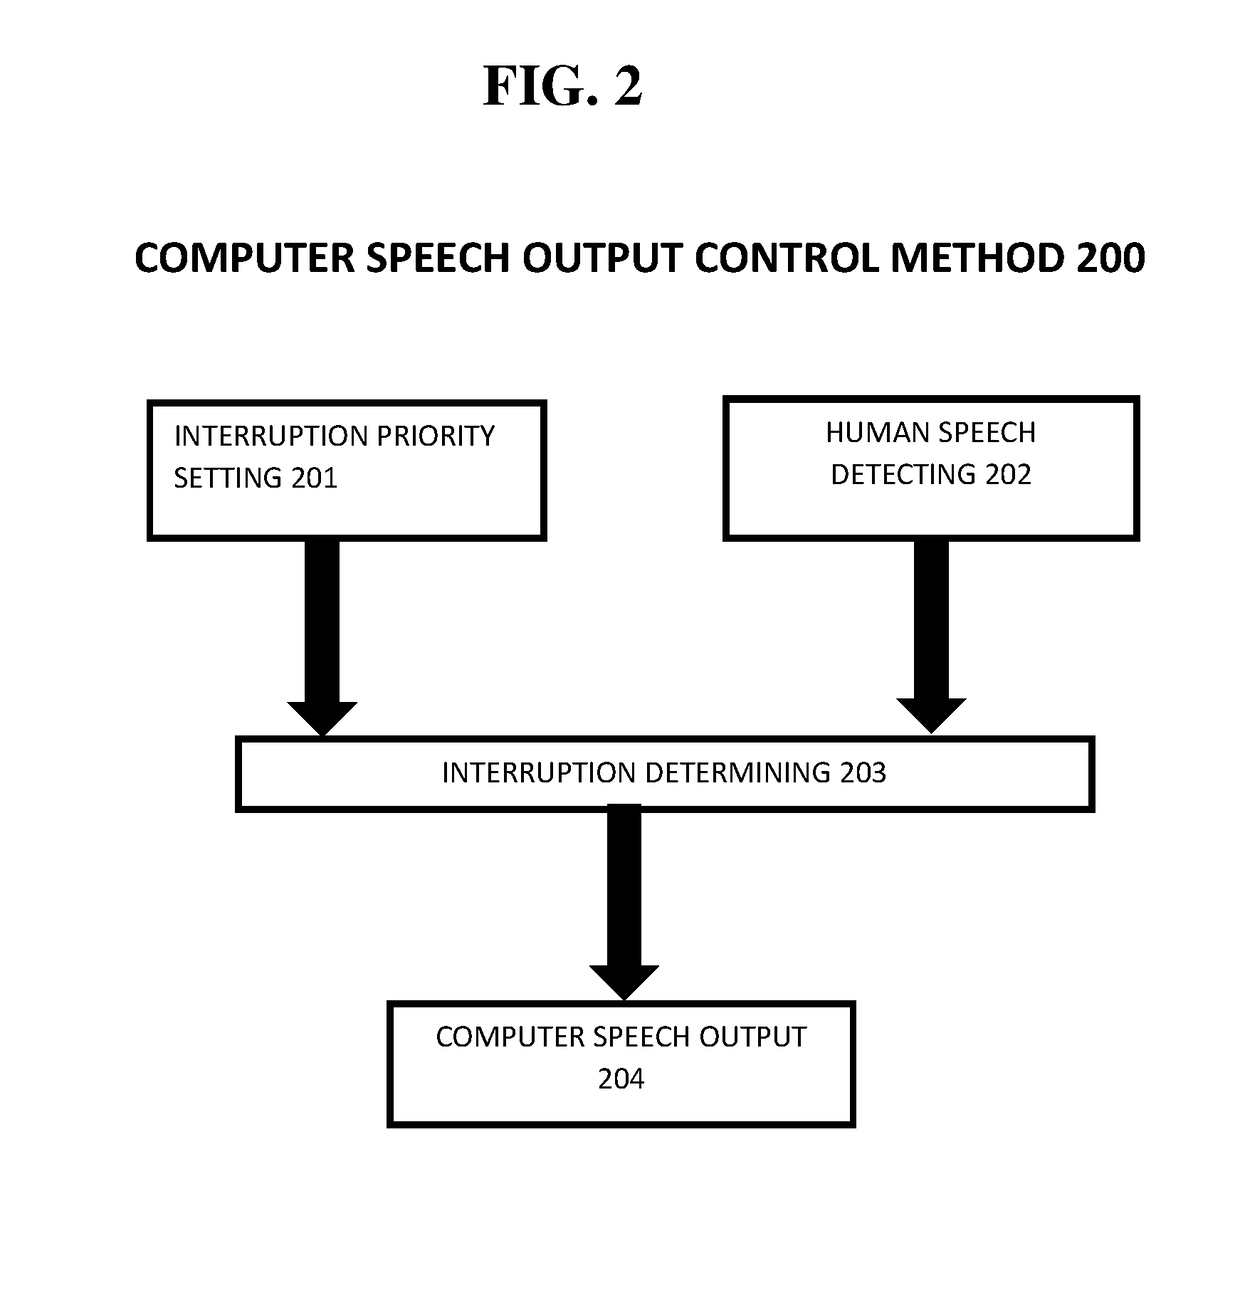 System, method, and recording medium for controlling dialogue interruptions by a speech output device